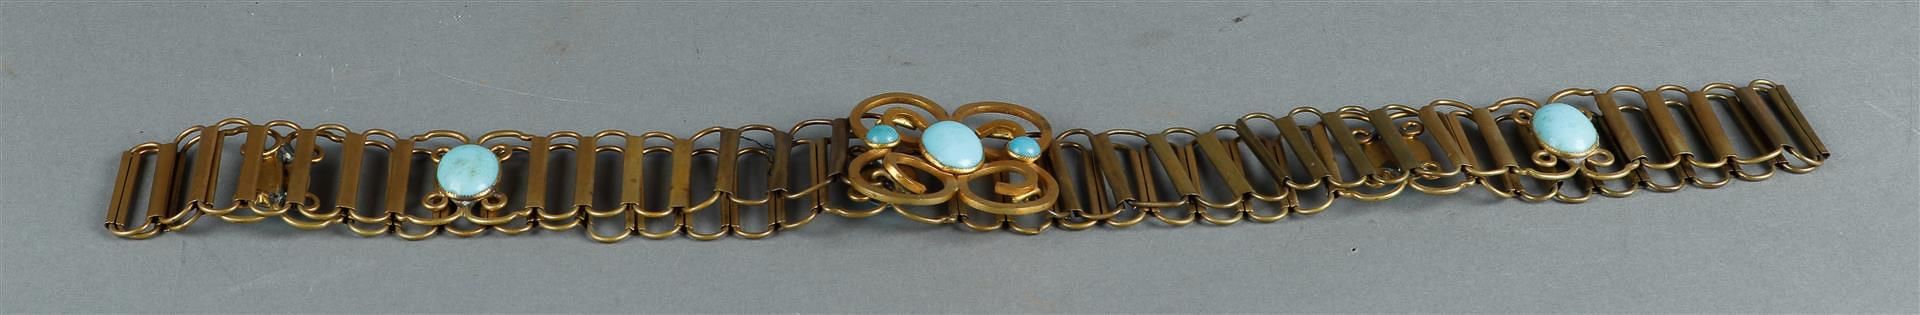 A gold-plated brass belt with buckle, set with large topaz stones. Russian, 19th/20th century.